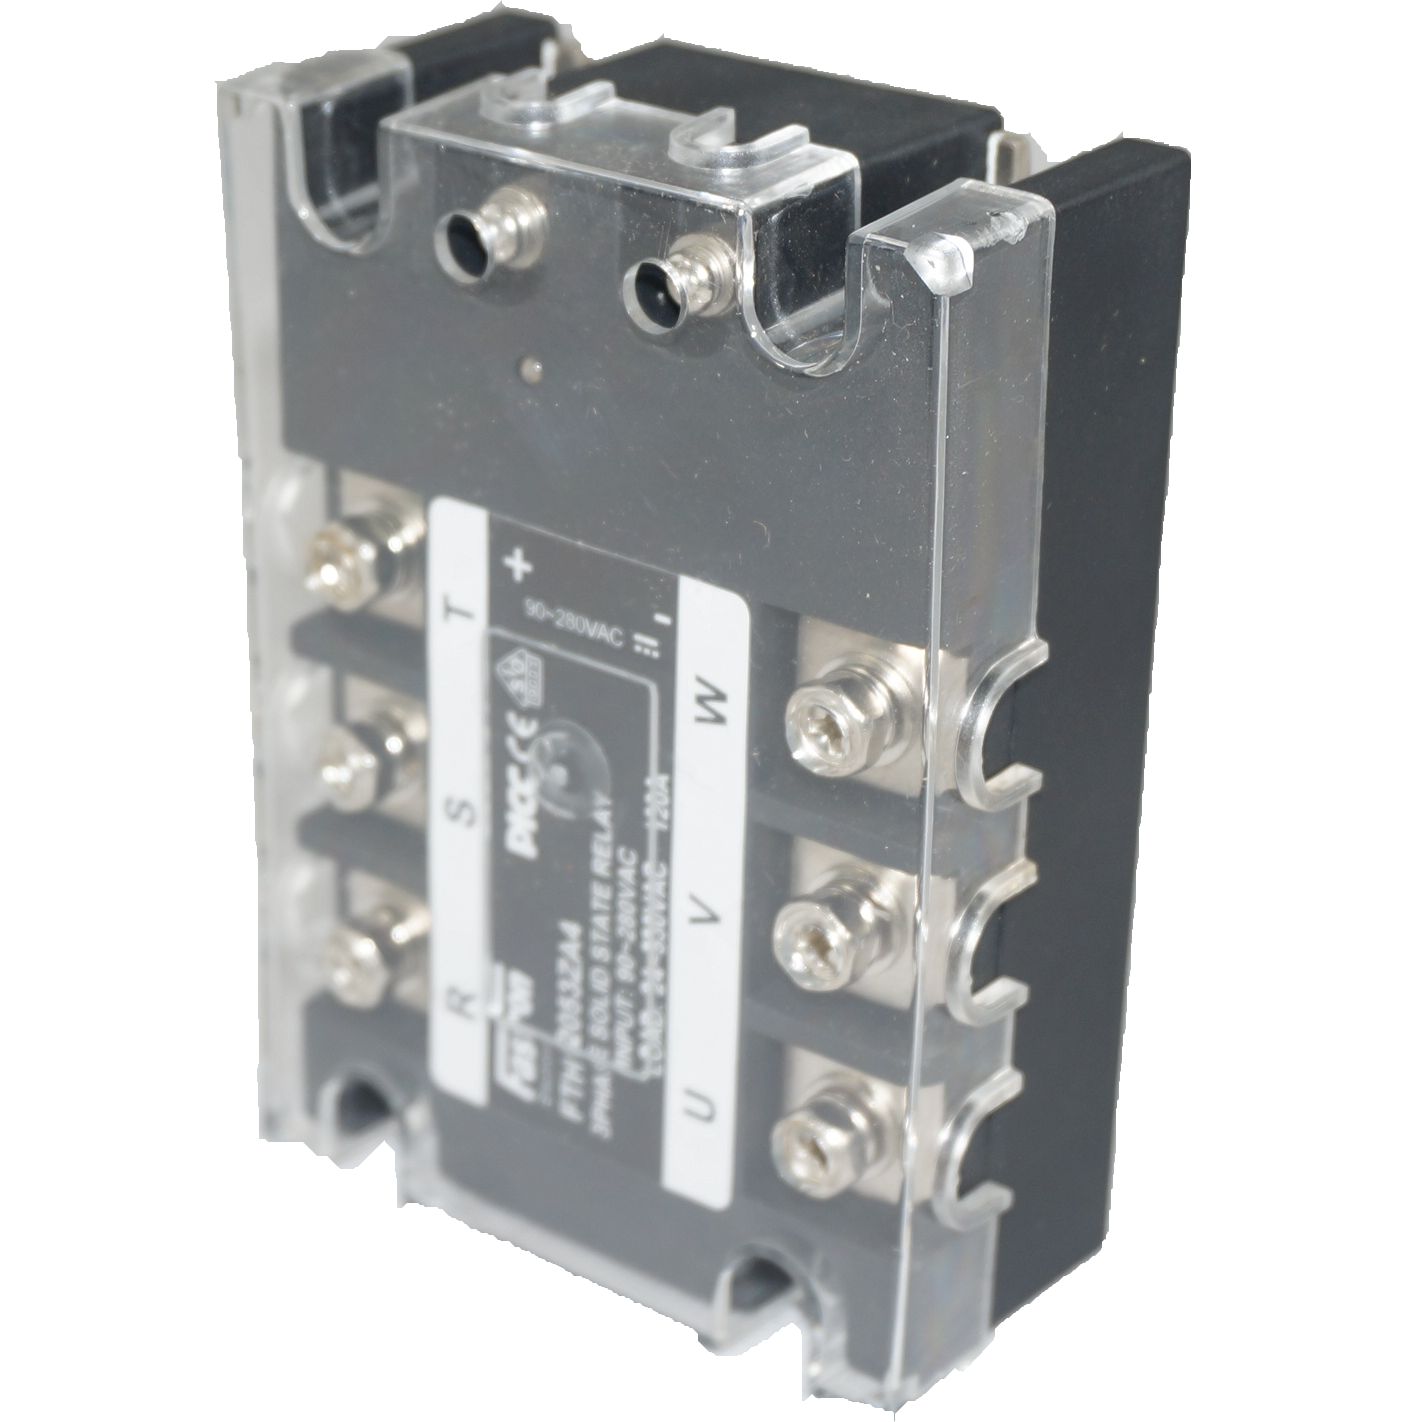 FTH6053ZD3, Solid State Relay, 3 Phase 3-32VDC Control, 60A, 70-530VAC Load, with IP20 Cover